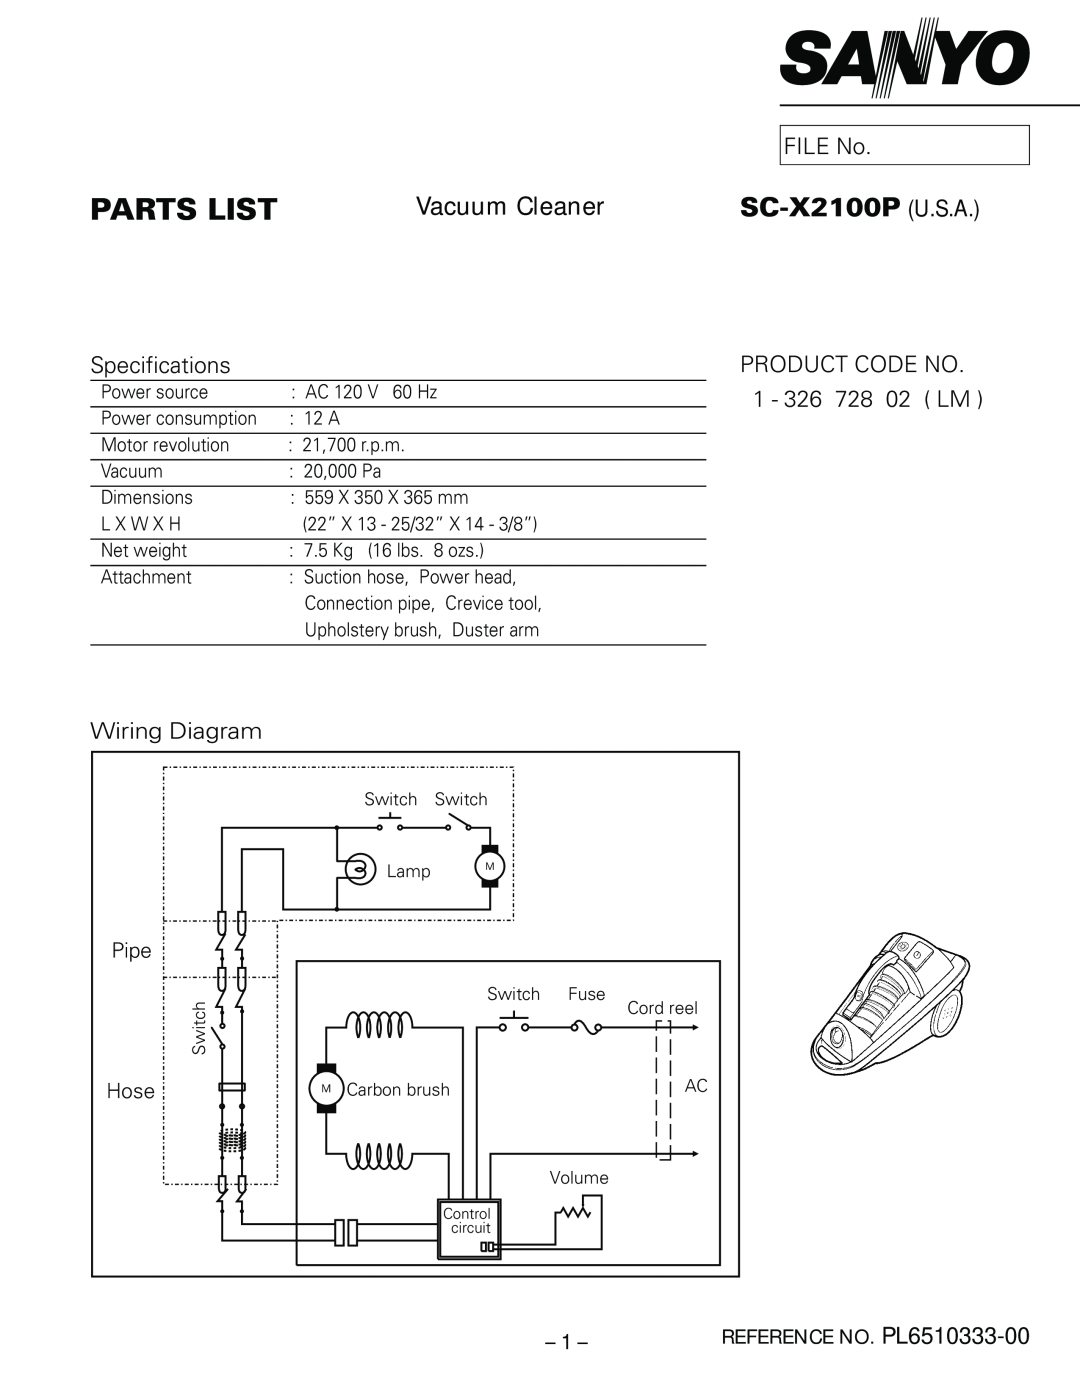 Sanyo specifications Hose, Parts List, SC-X2100P U.S.A, Vacuum Cleaner, FILE No, Specifications, Product Code No 